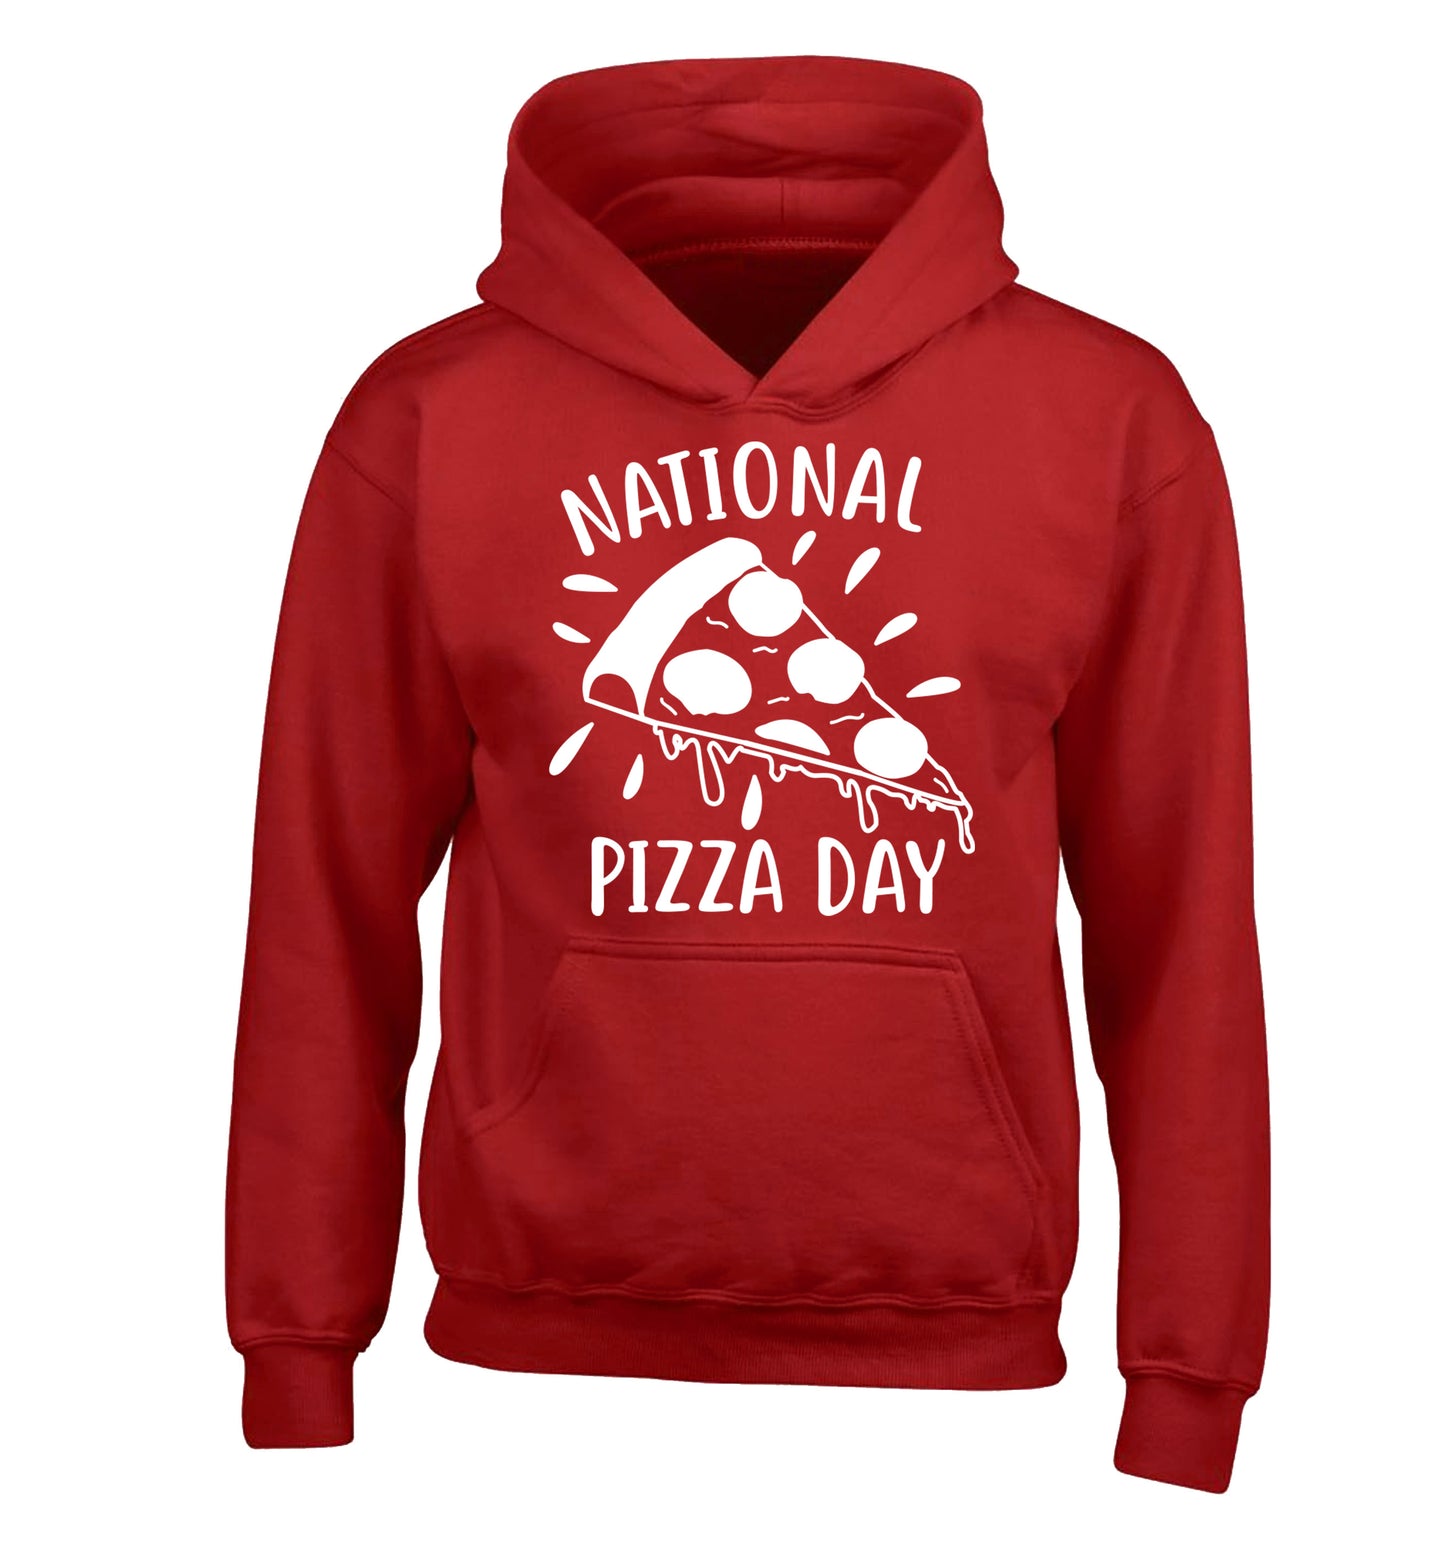 National pizza day children's red hoodie 12-13 Years